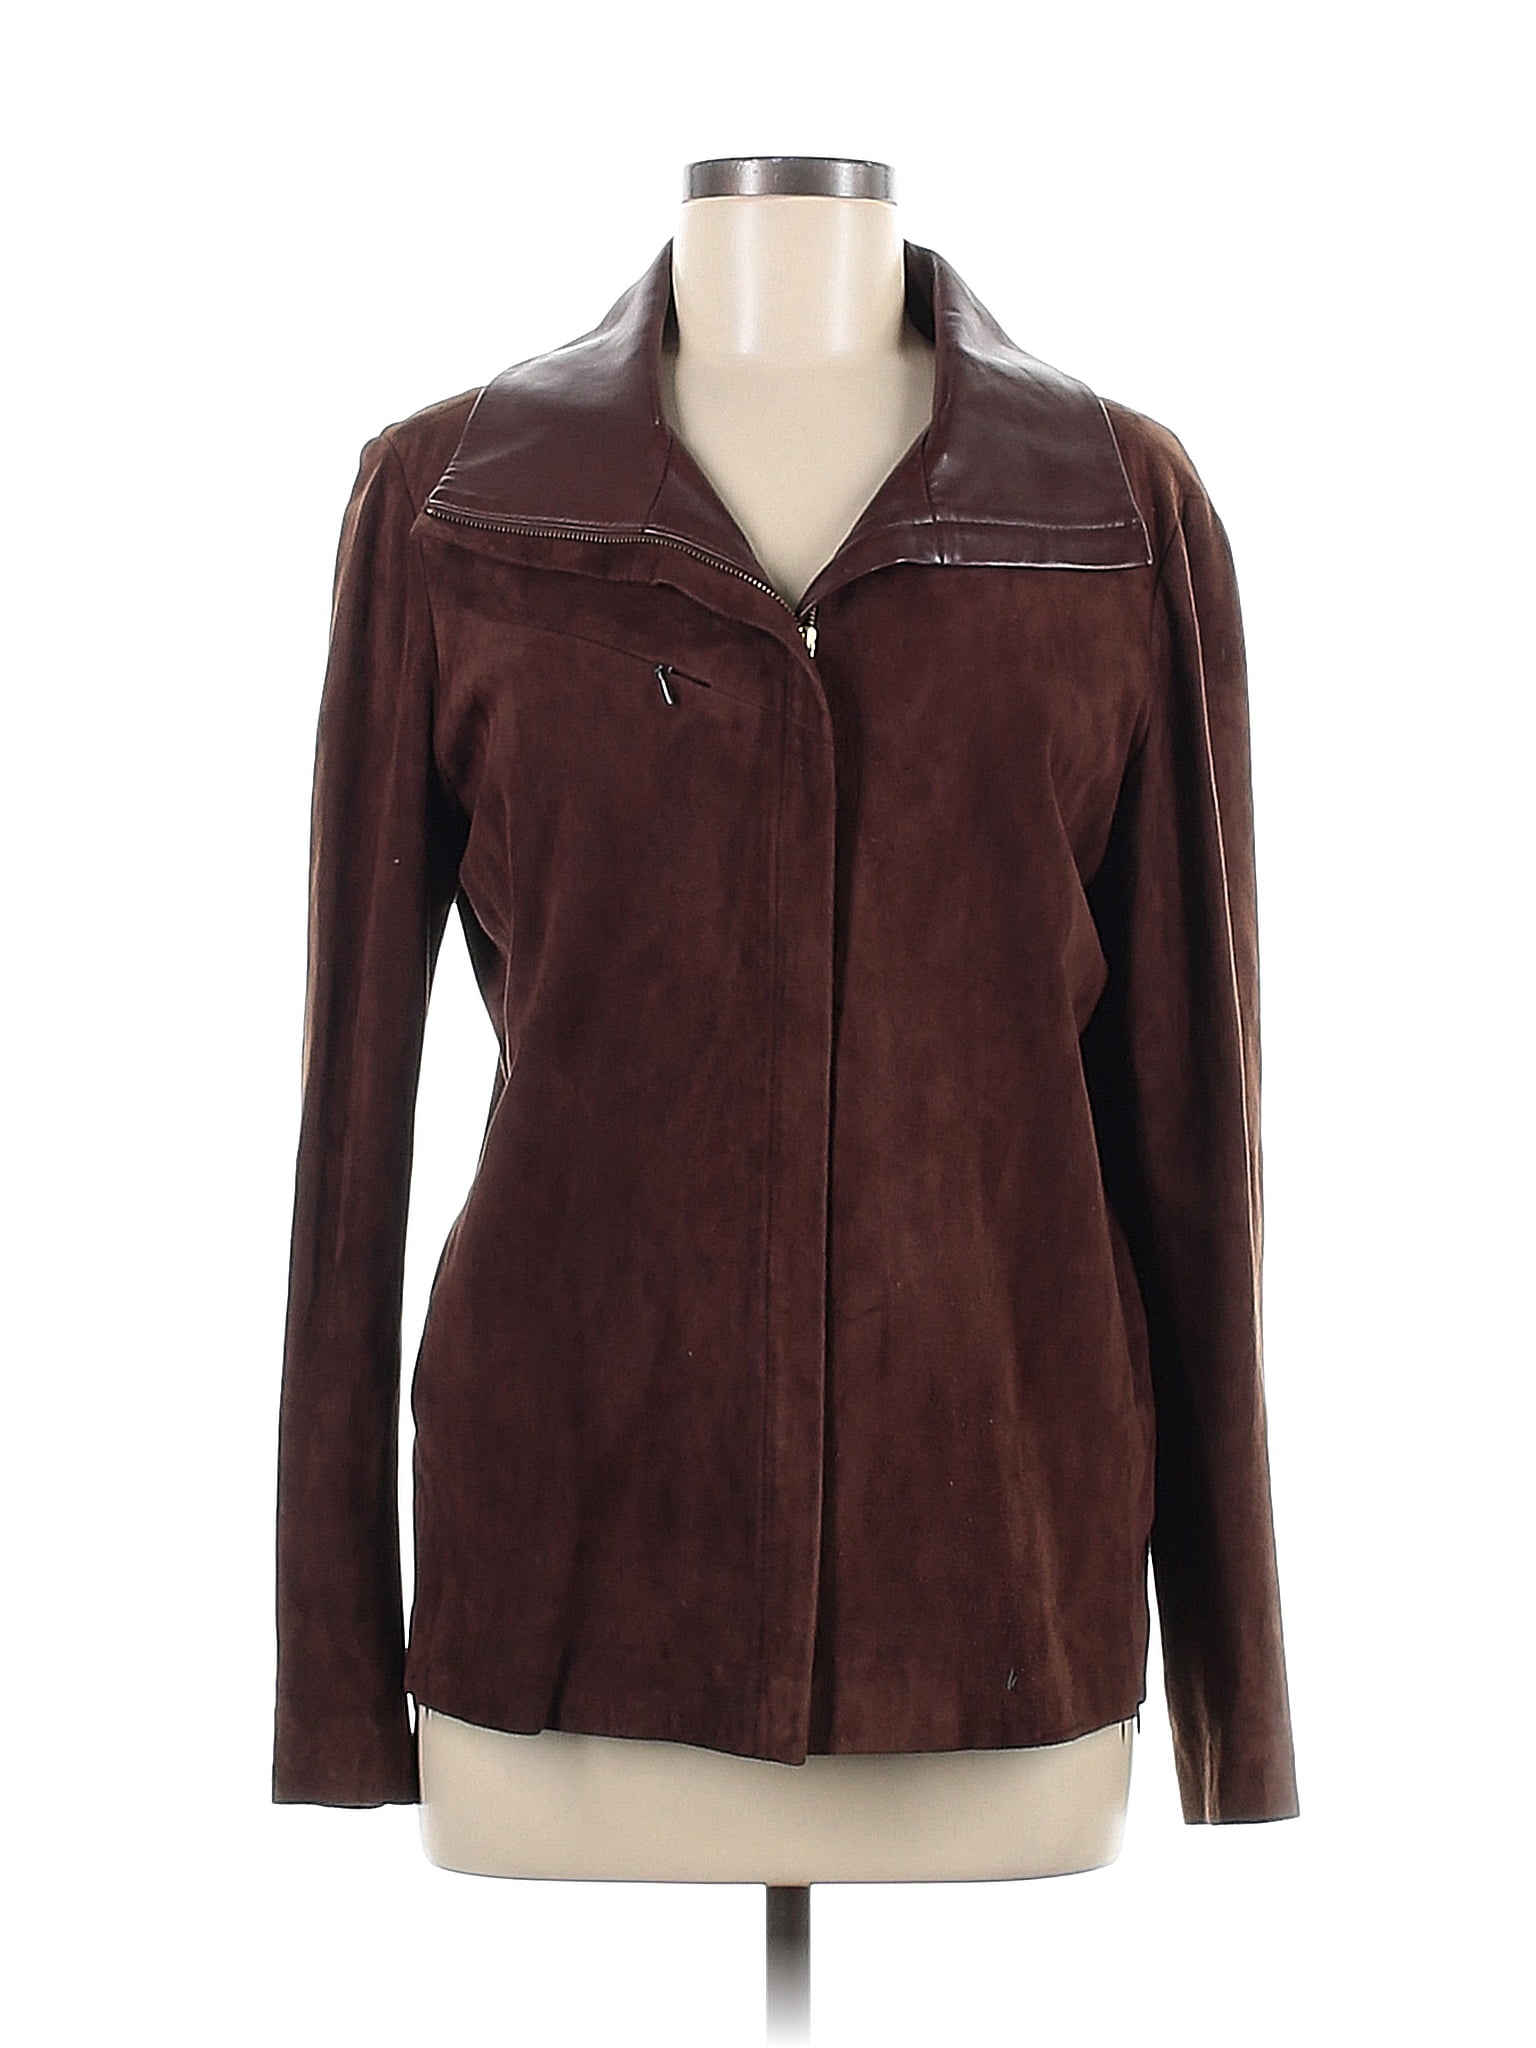 Sibylle Lyn Solid Brown Faux Leather Jacket Size 8 - 63% off | thredUP